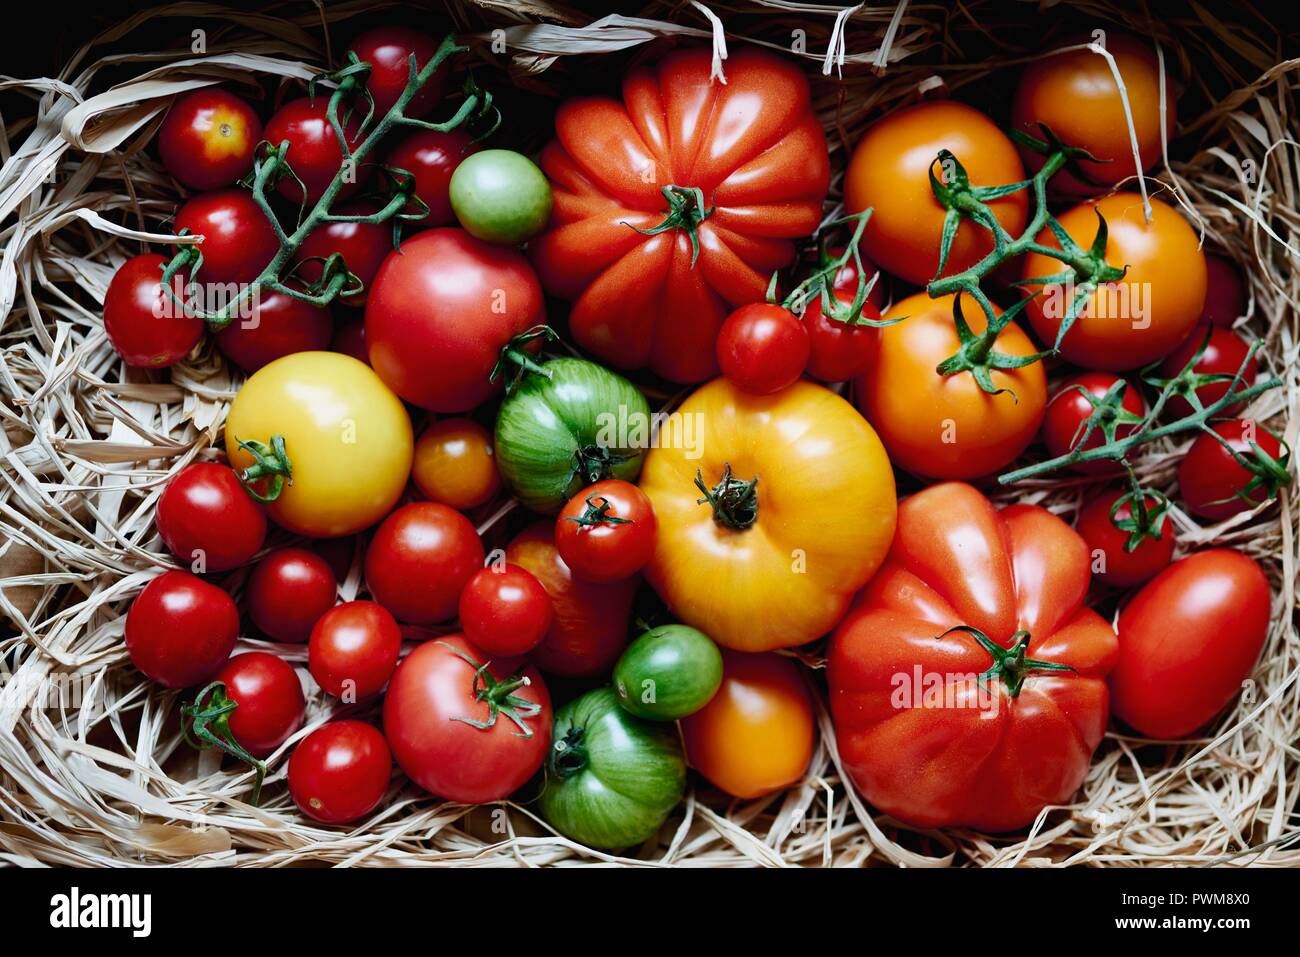 An arrangement of various tomatoes Stock Photo